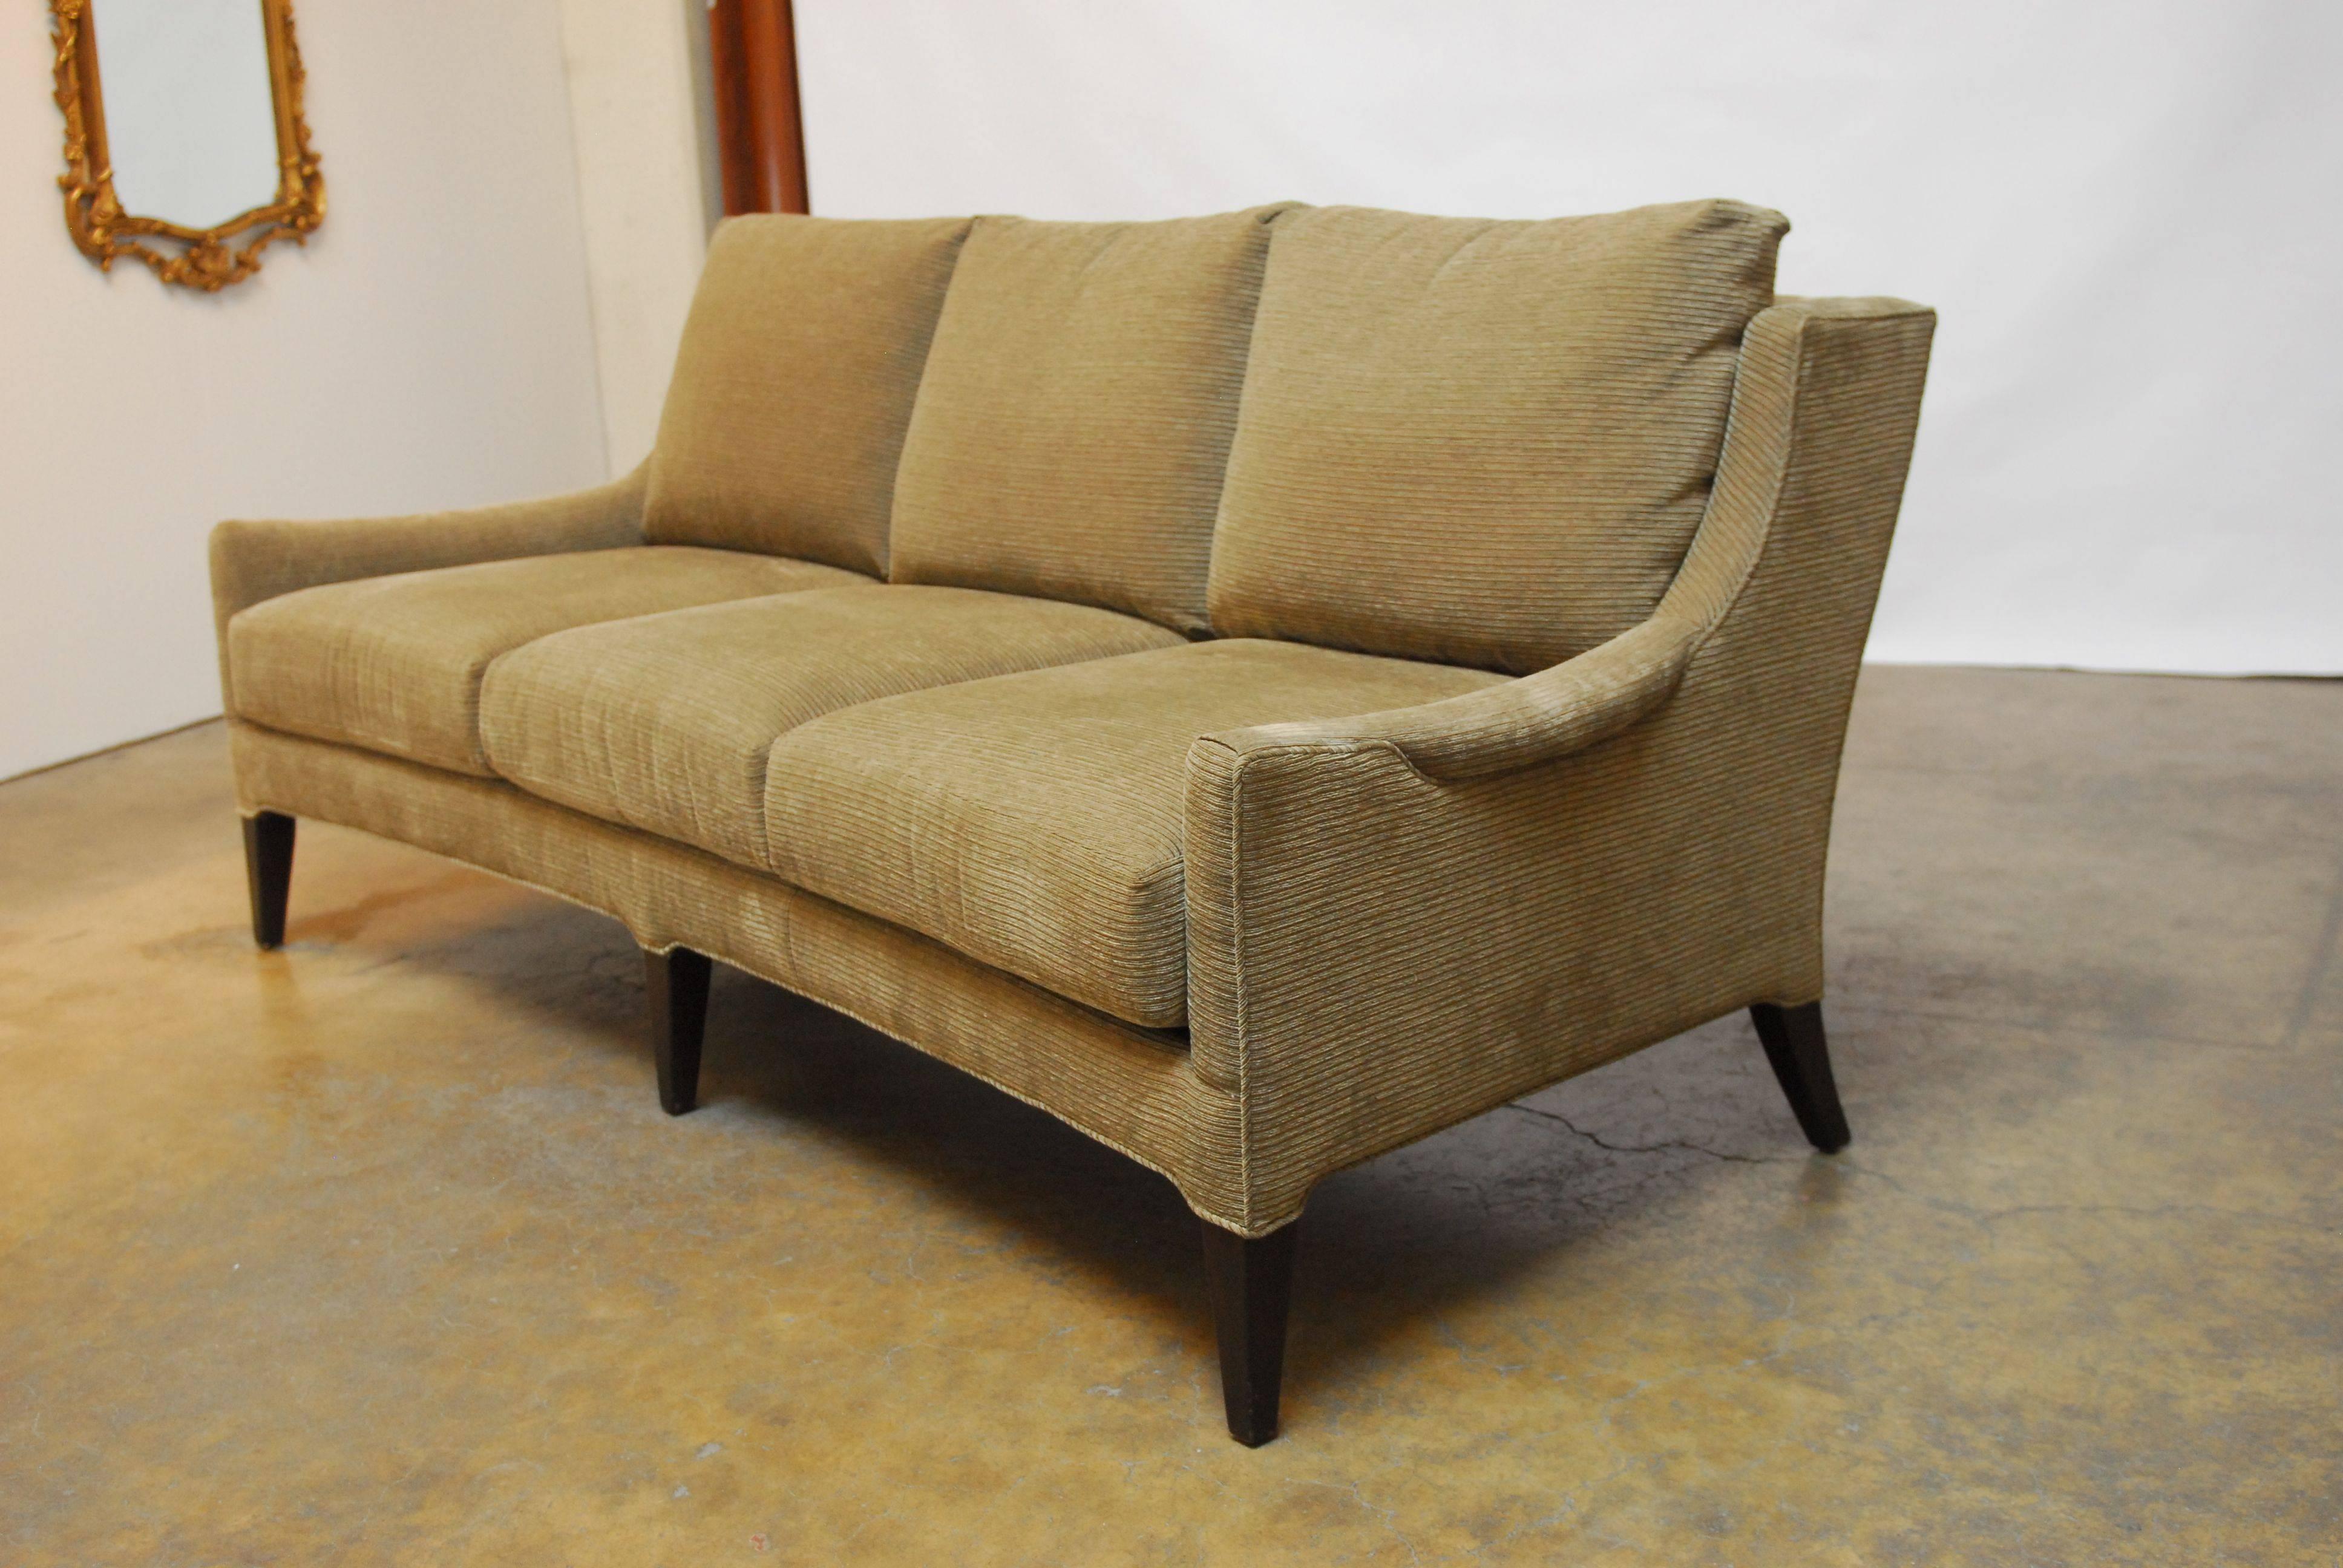 Sculptural sofa with a curved front. Handmade in the U.S. by Kravet in the Mid-Century Modern style. Constructed with a deep seat and an arched back with splayed rear legs and tapered front legs finished in an ebonized wood. Upholstered in a rich